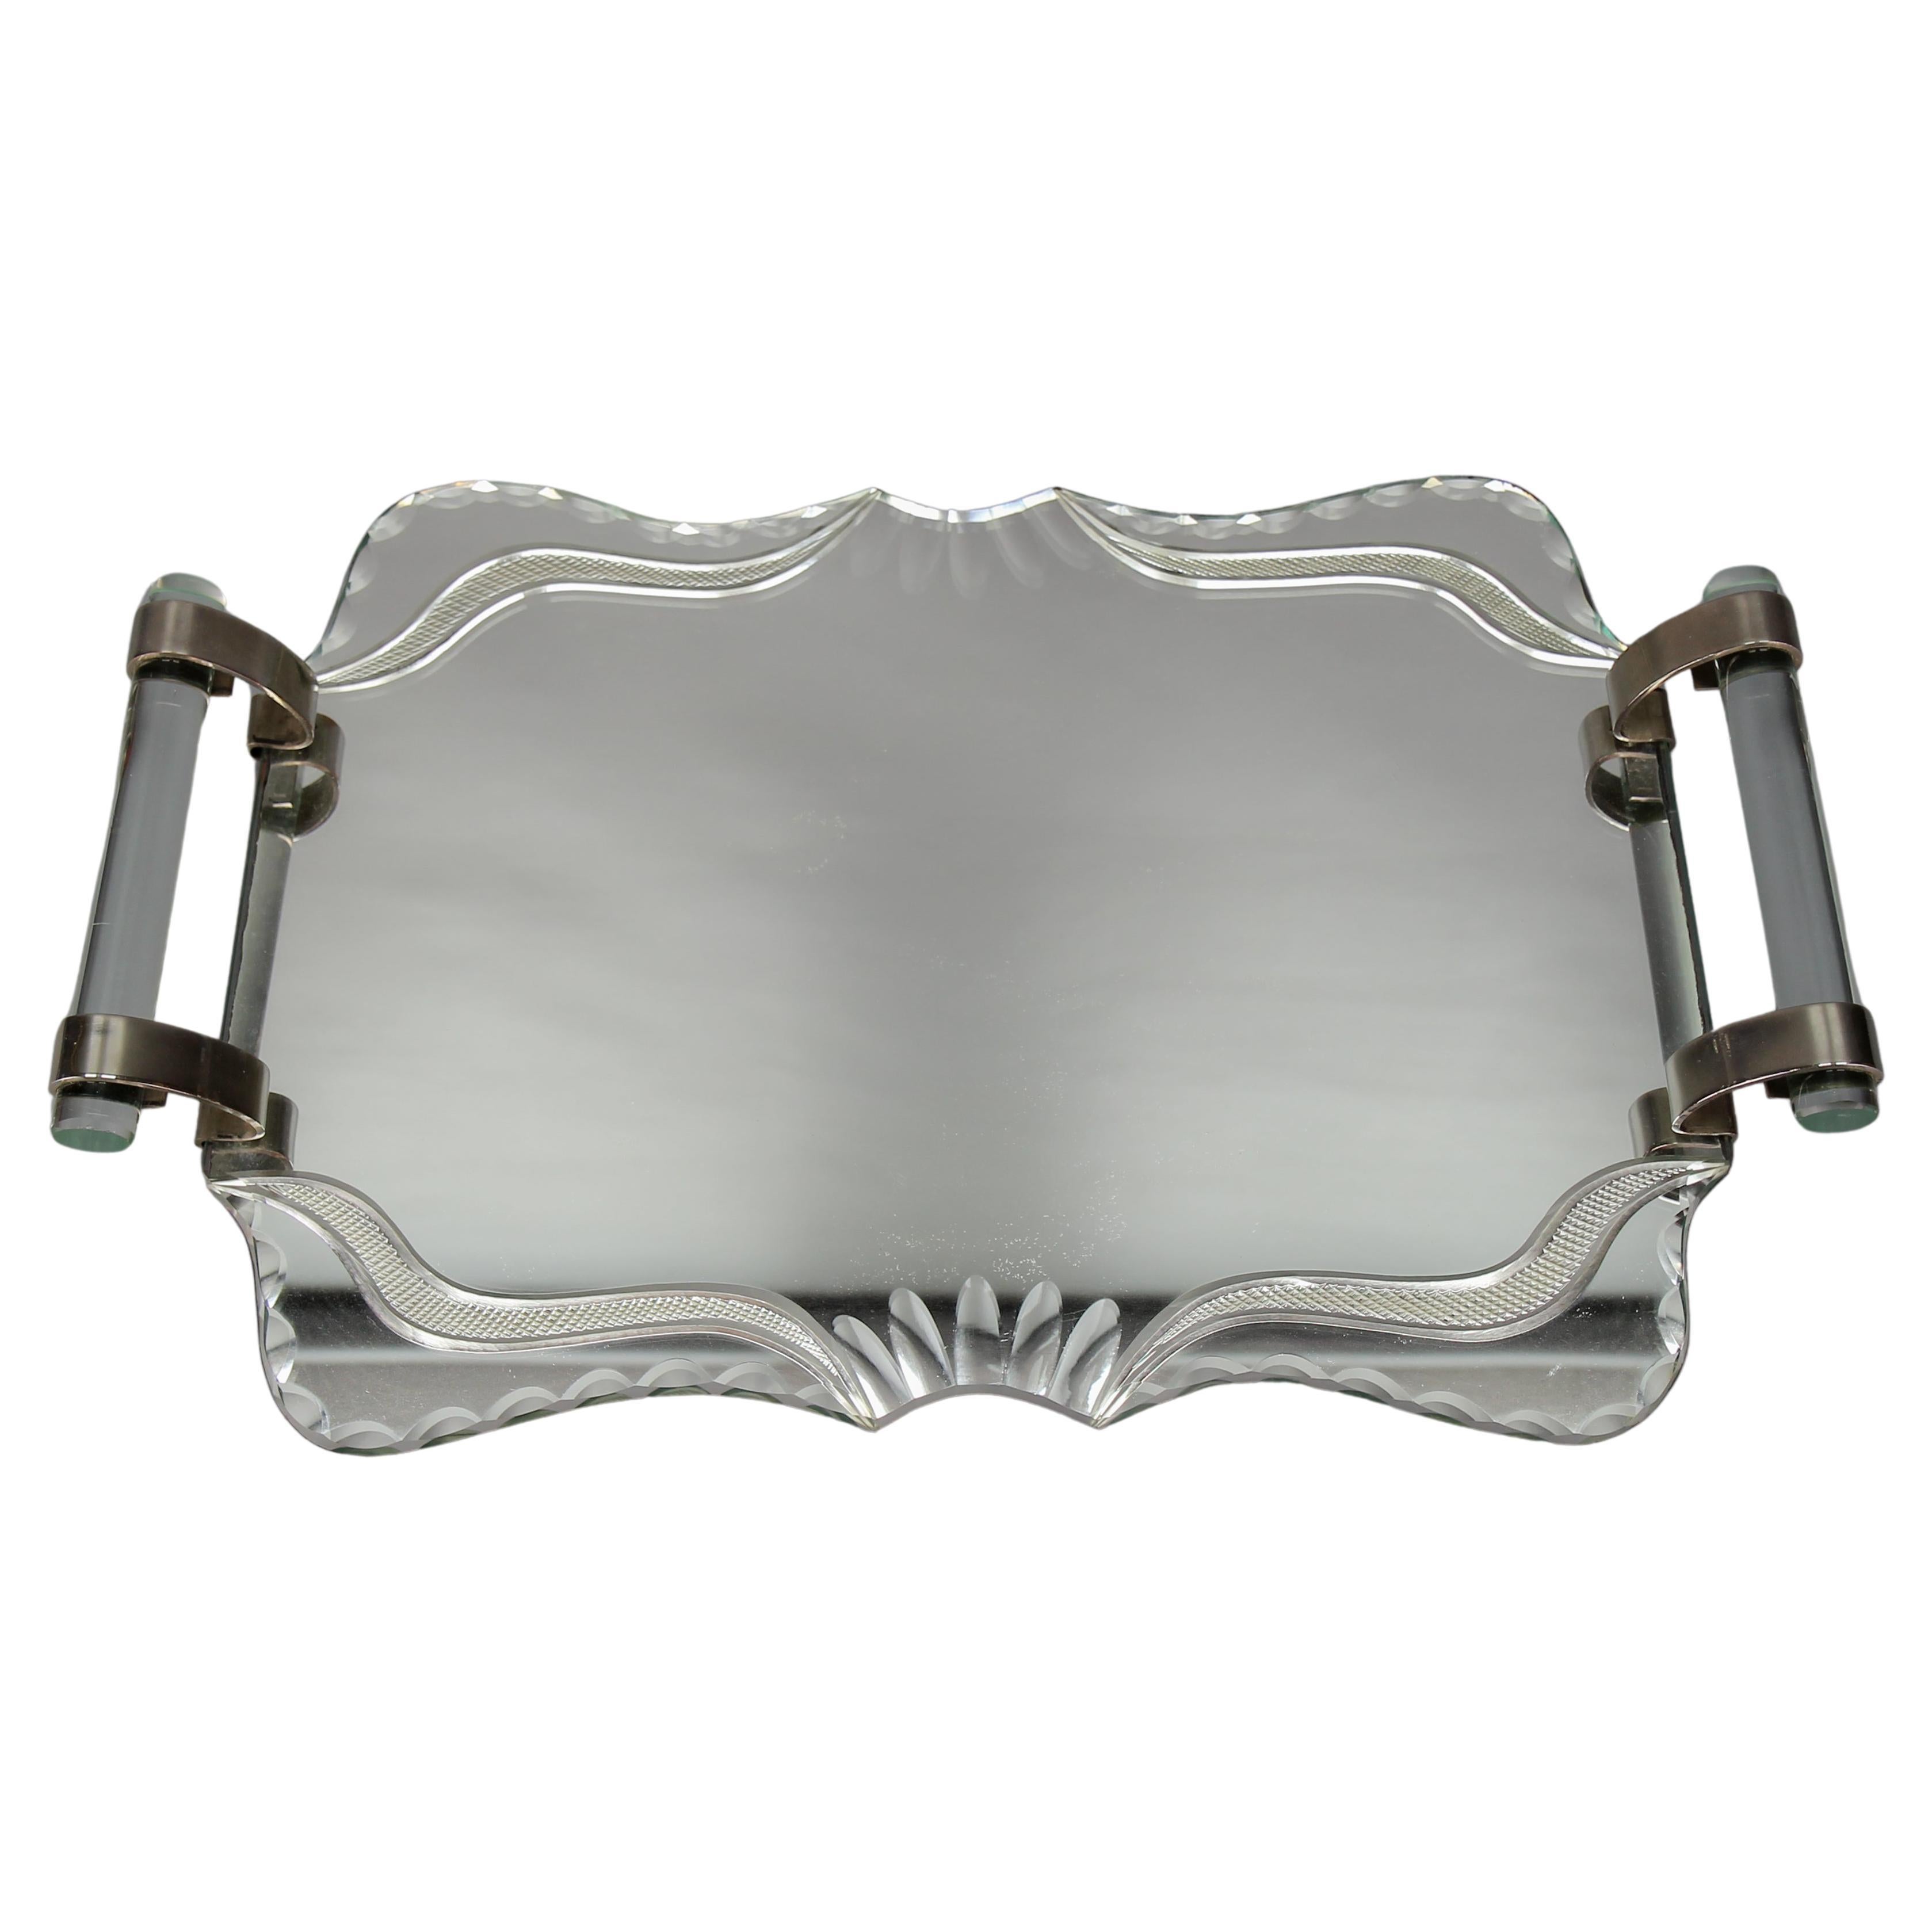 Art Deco Cut Mirror, Glass and Chrome Serving Tray, France, 1930s For Sale